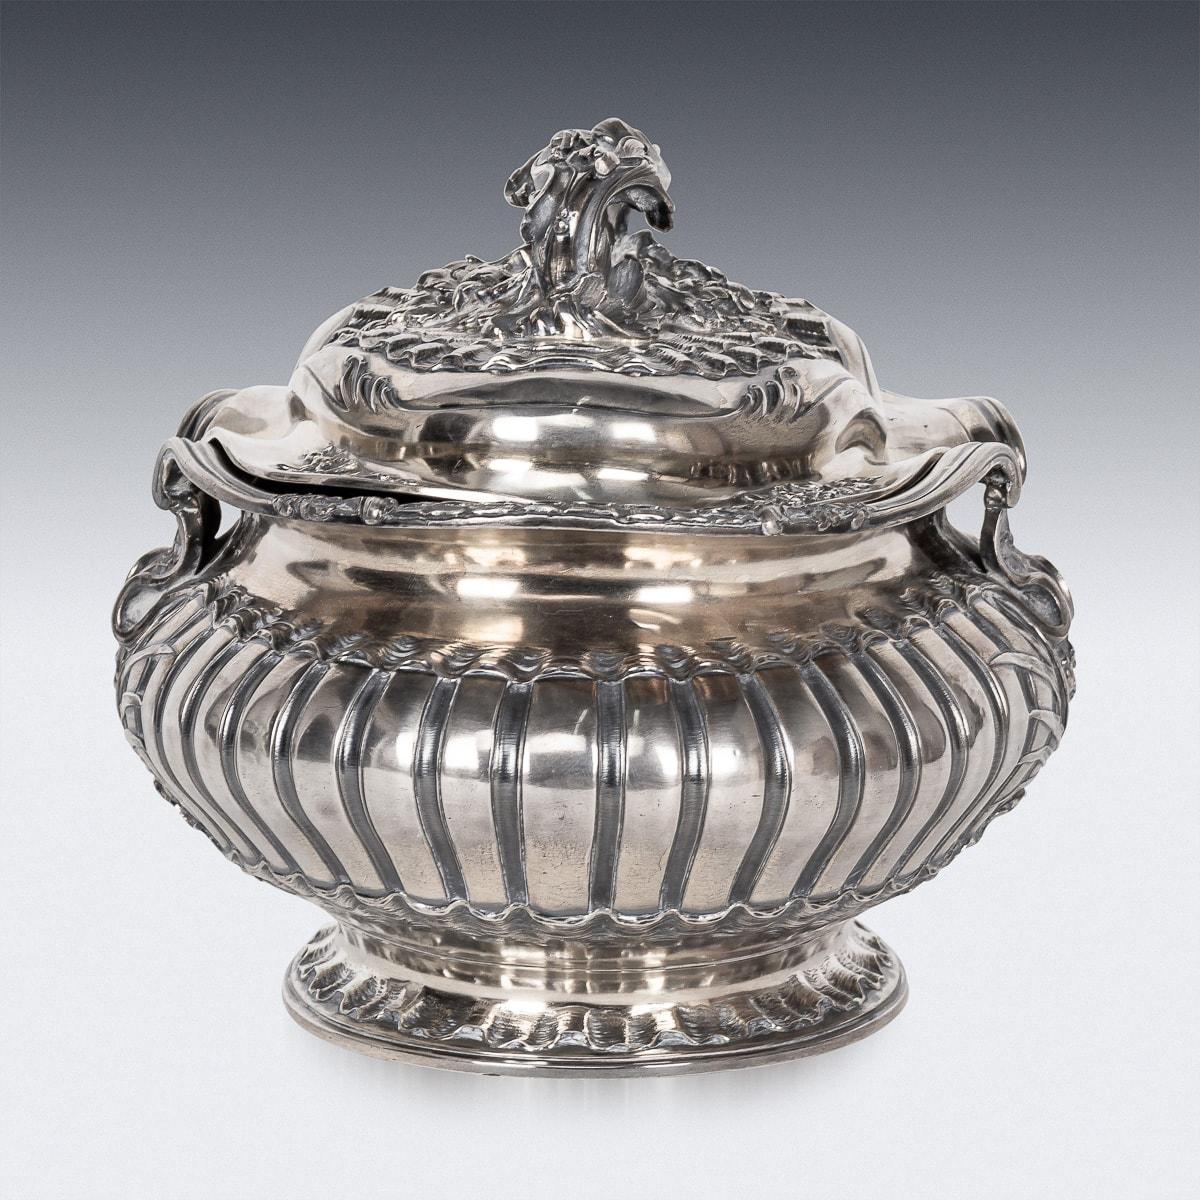 19th Century French Solid Silver Soup Tureen, Alphonse Debain, Paris c.1890 For Sale 1